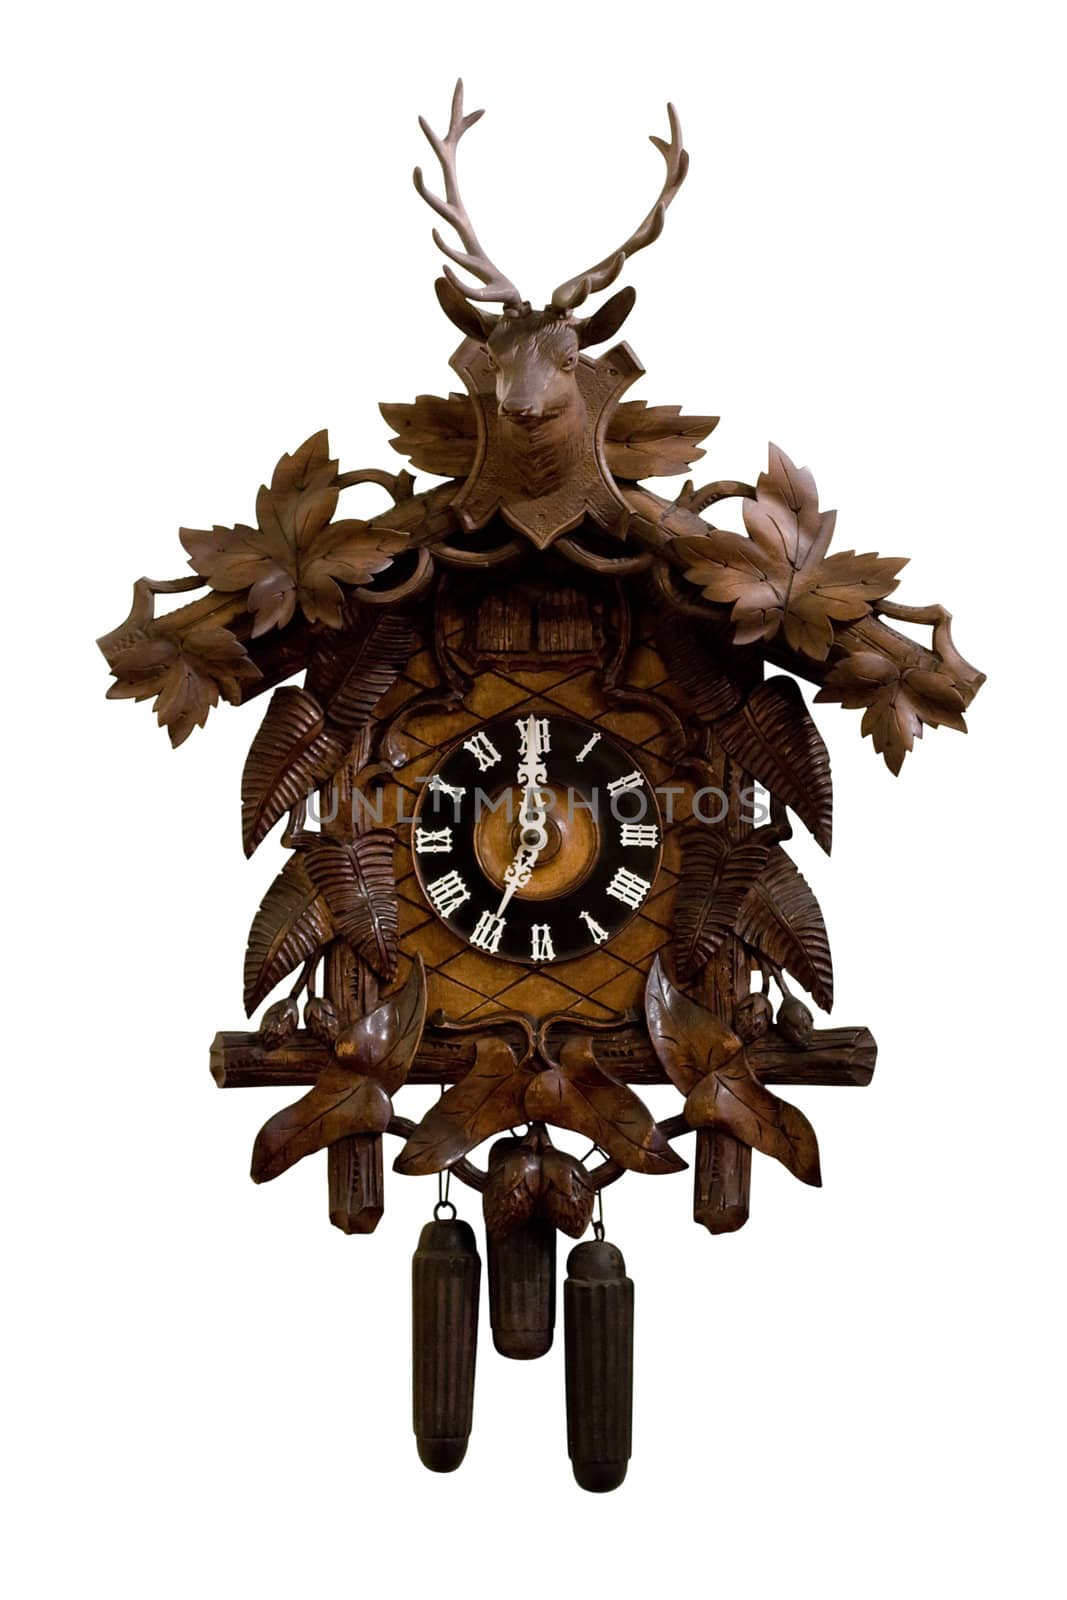 Old wooden cuckoo clock isolated on a white background.